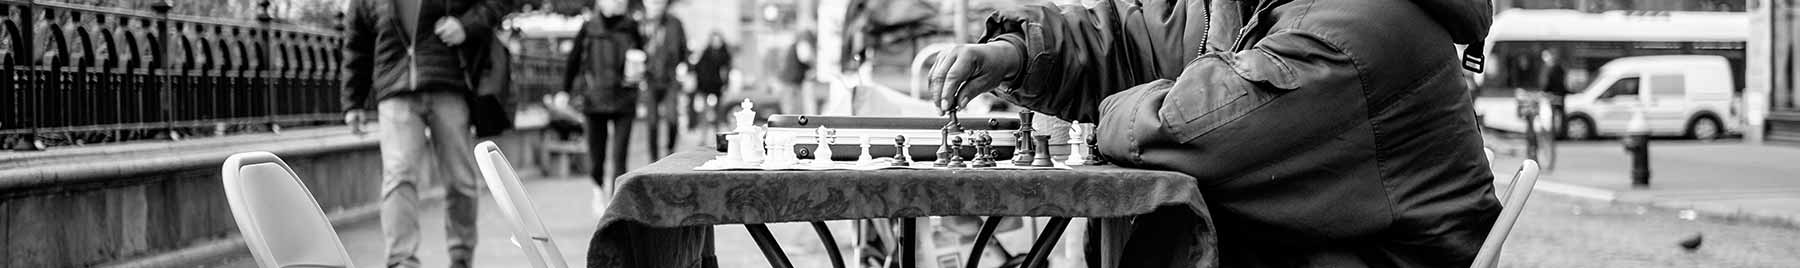 An elderly man playing chess by himself on a New York City street.